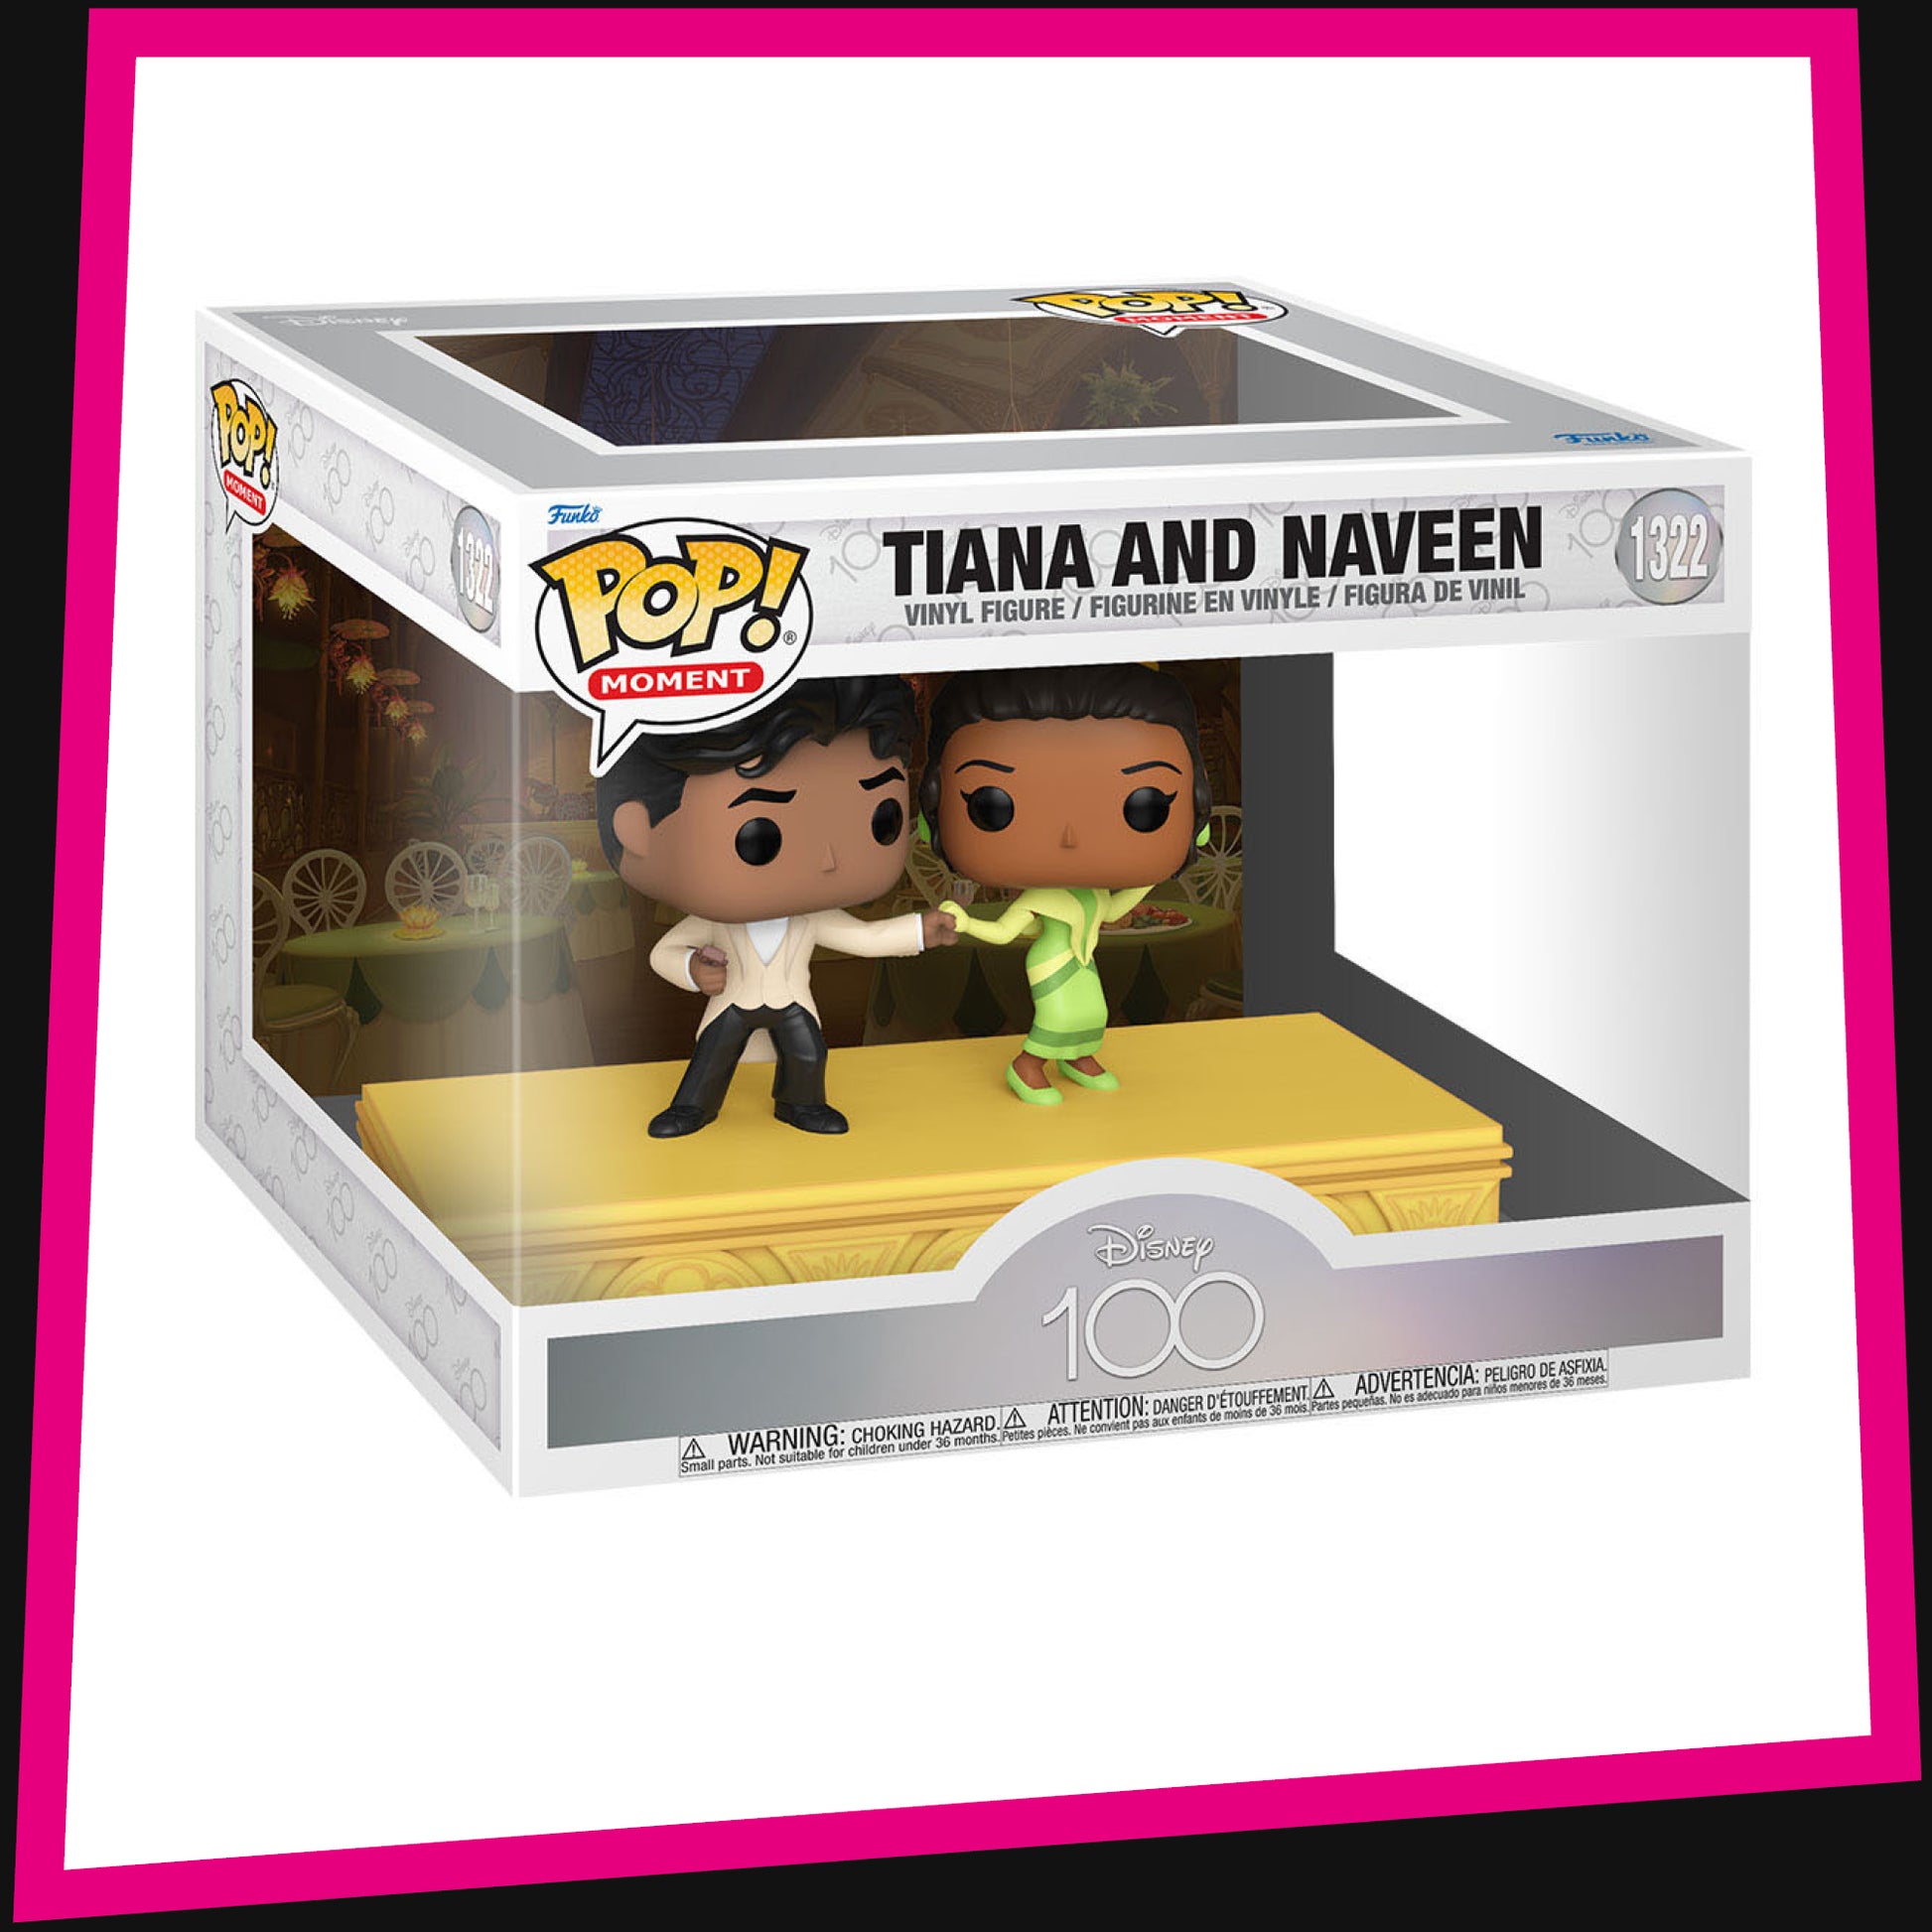 Tiana and Naveen - Disney 100 Anniversary #1322 Funko POP! Vinyl Momen –  Derek's Toy Barn - New and Pre-Owned Toys & Collectibles